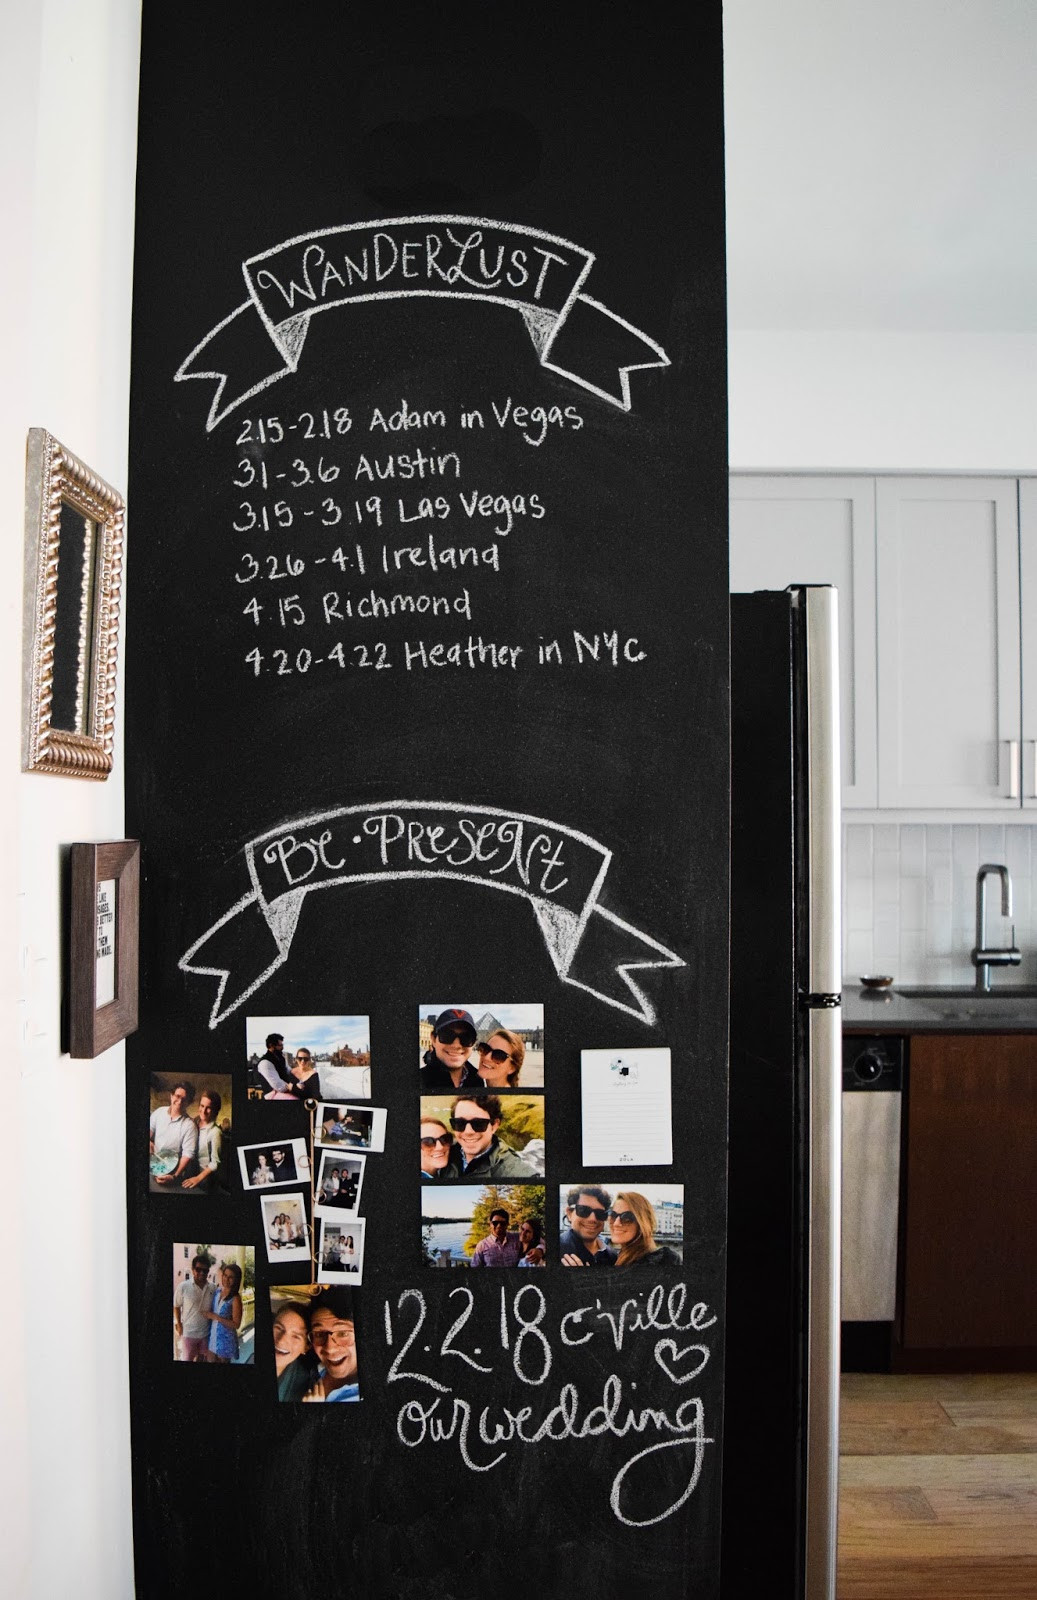 Kitchen Chalkboard Wall Ideas
 How To Design a Kitchen Chalkboard Wall Heather Bien